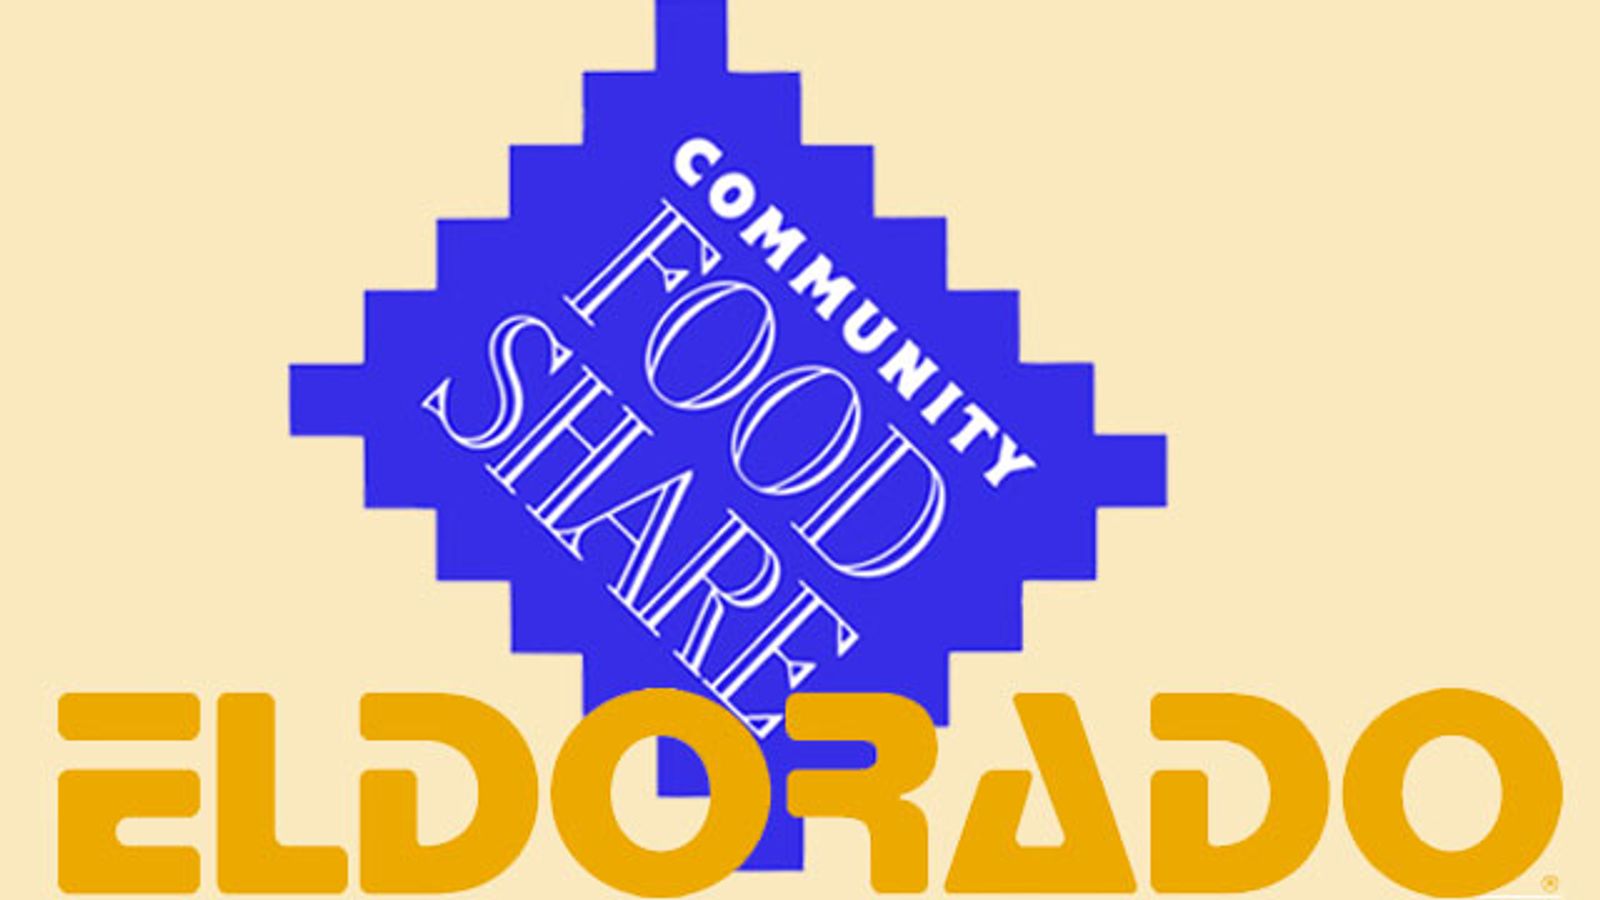 Eldorado Helps Fight Hunger With Latest Food Drive Efforts